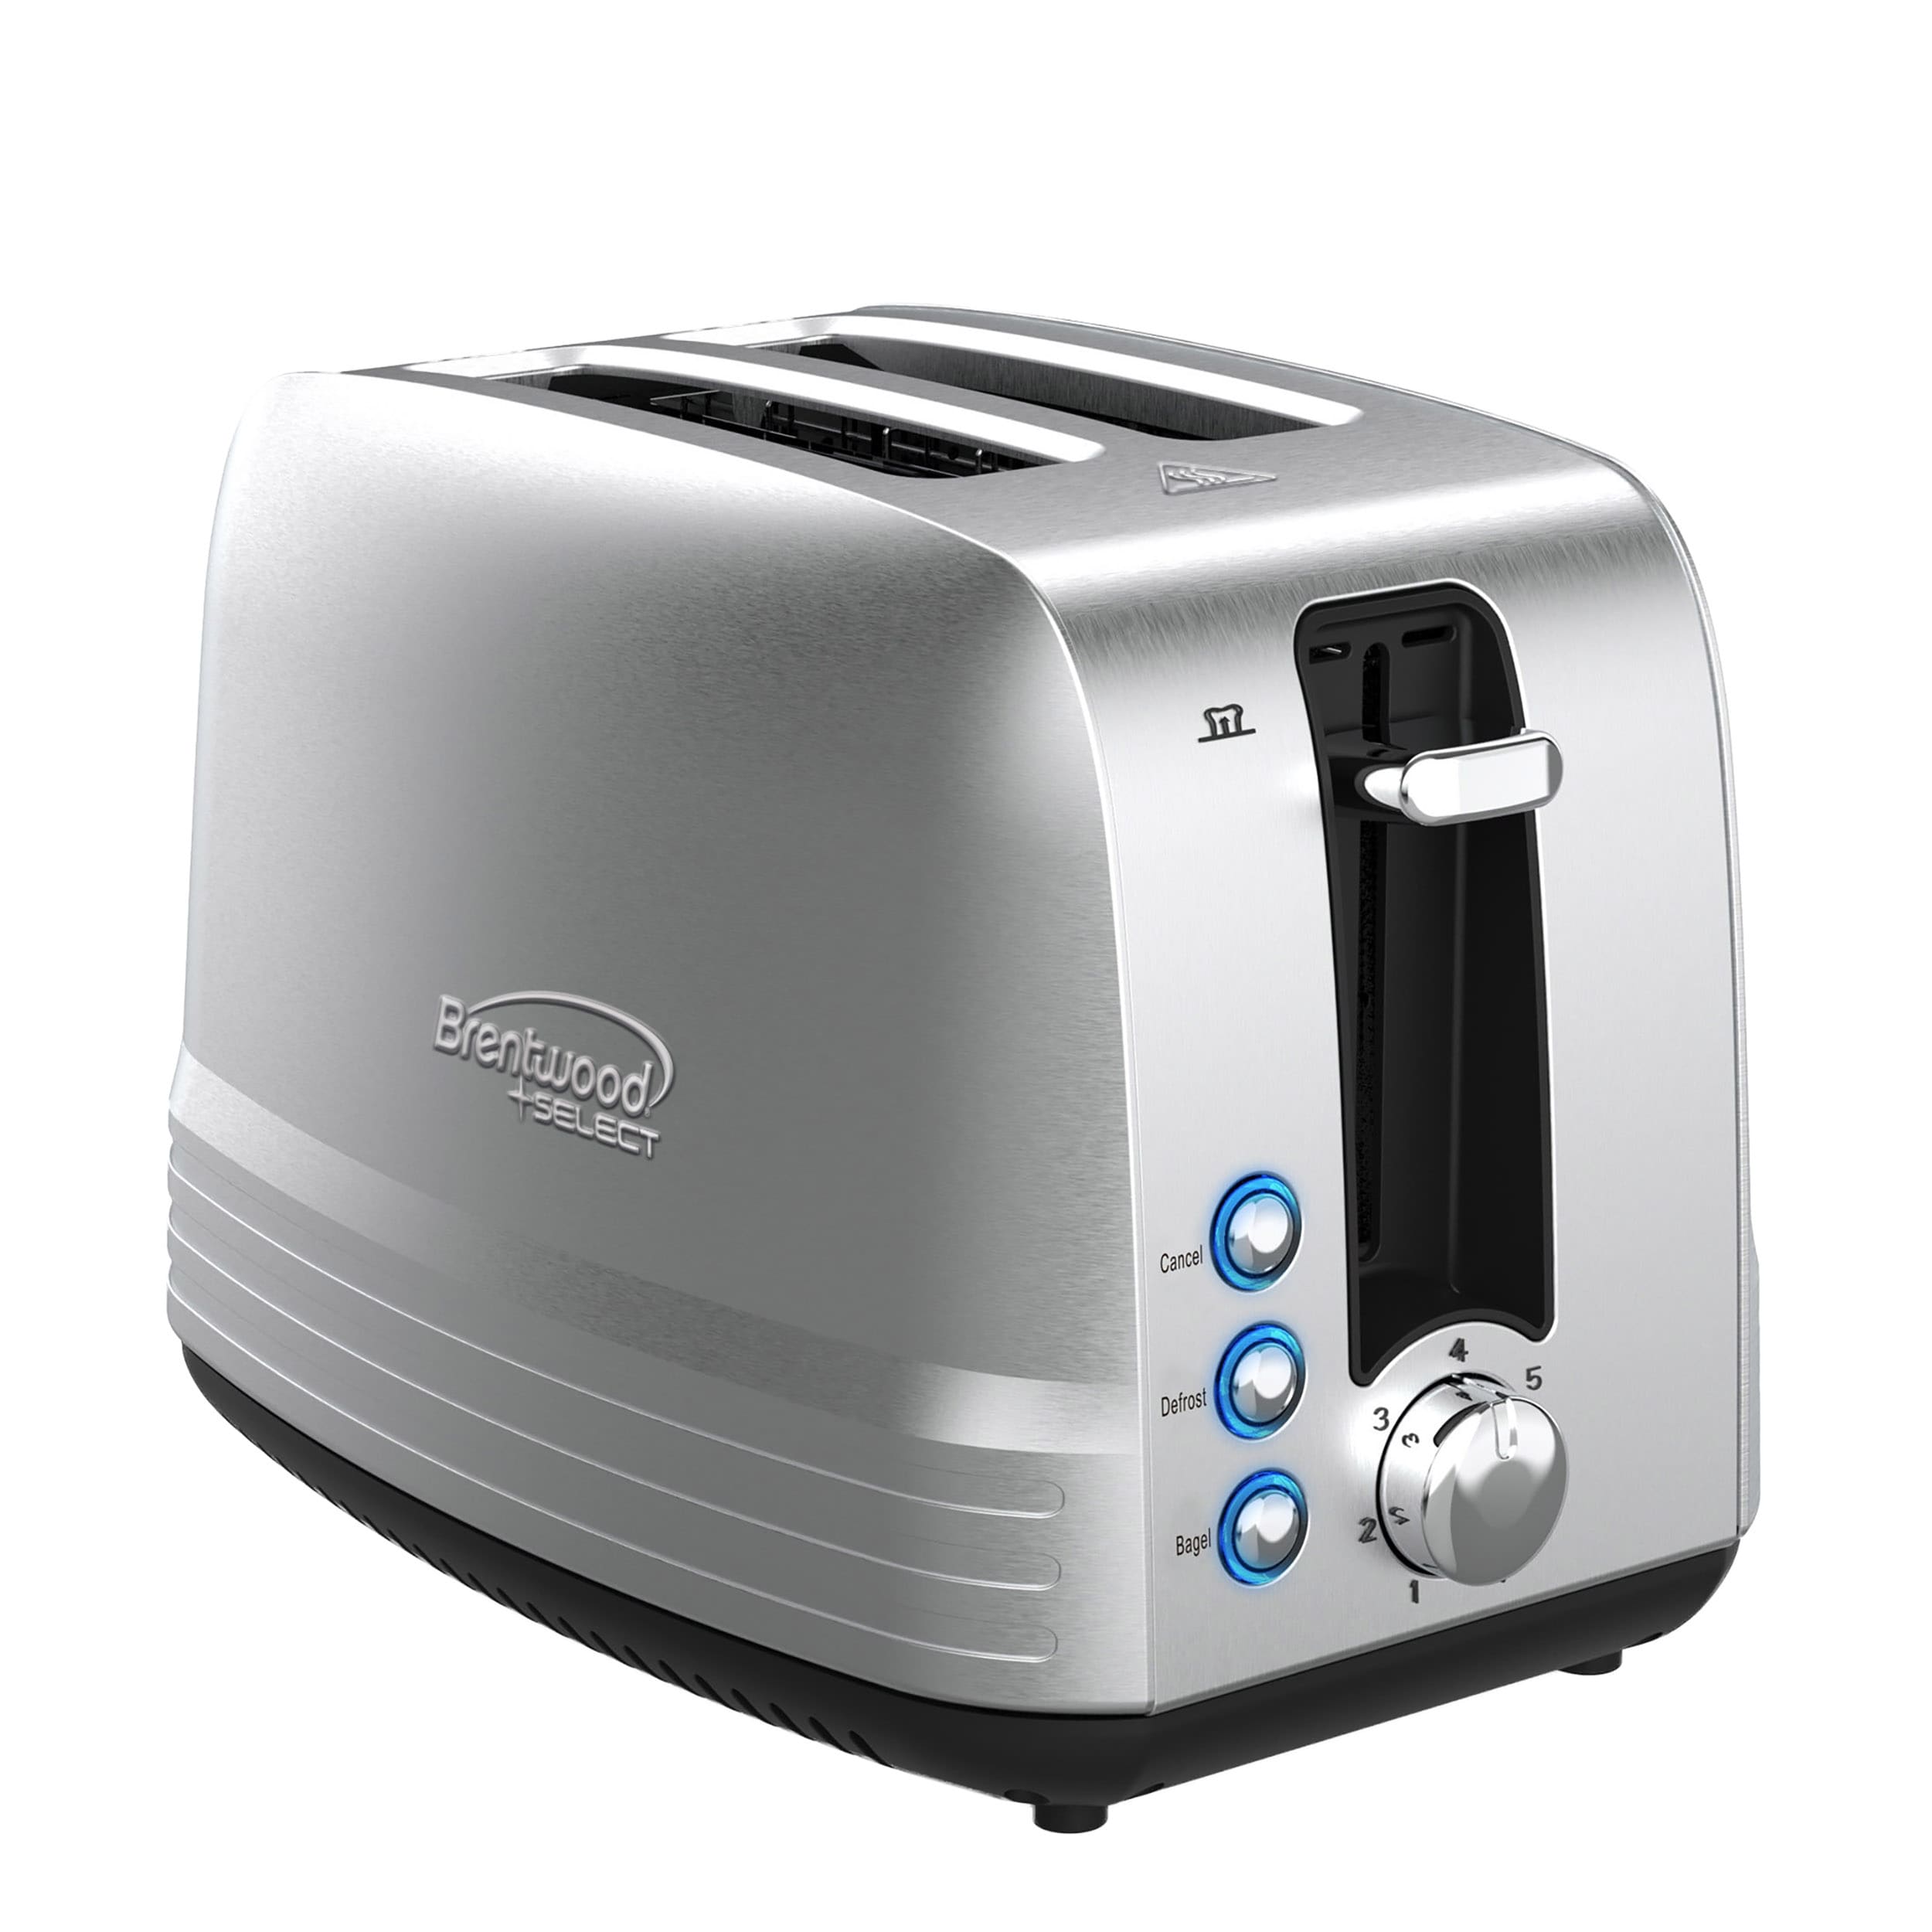 https://ak1.ostkcdn.com/images/products/is/images/direct/22aeeb771807f5fce817e8b2686c1208abc6e81f/Extra-Wide-2-Slot-Stainless-Steel-Toaster.jpg